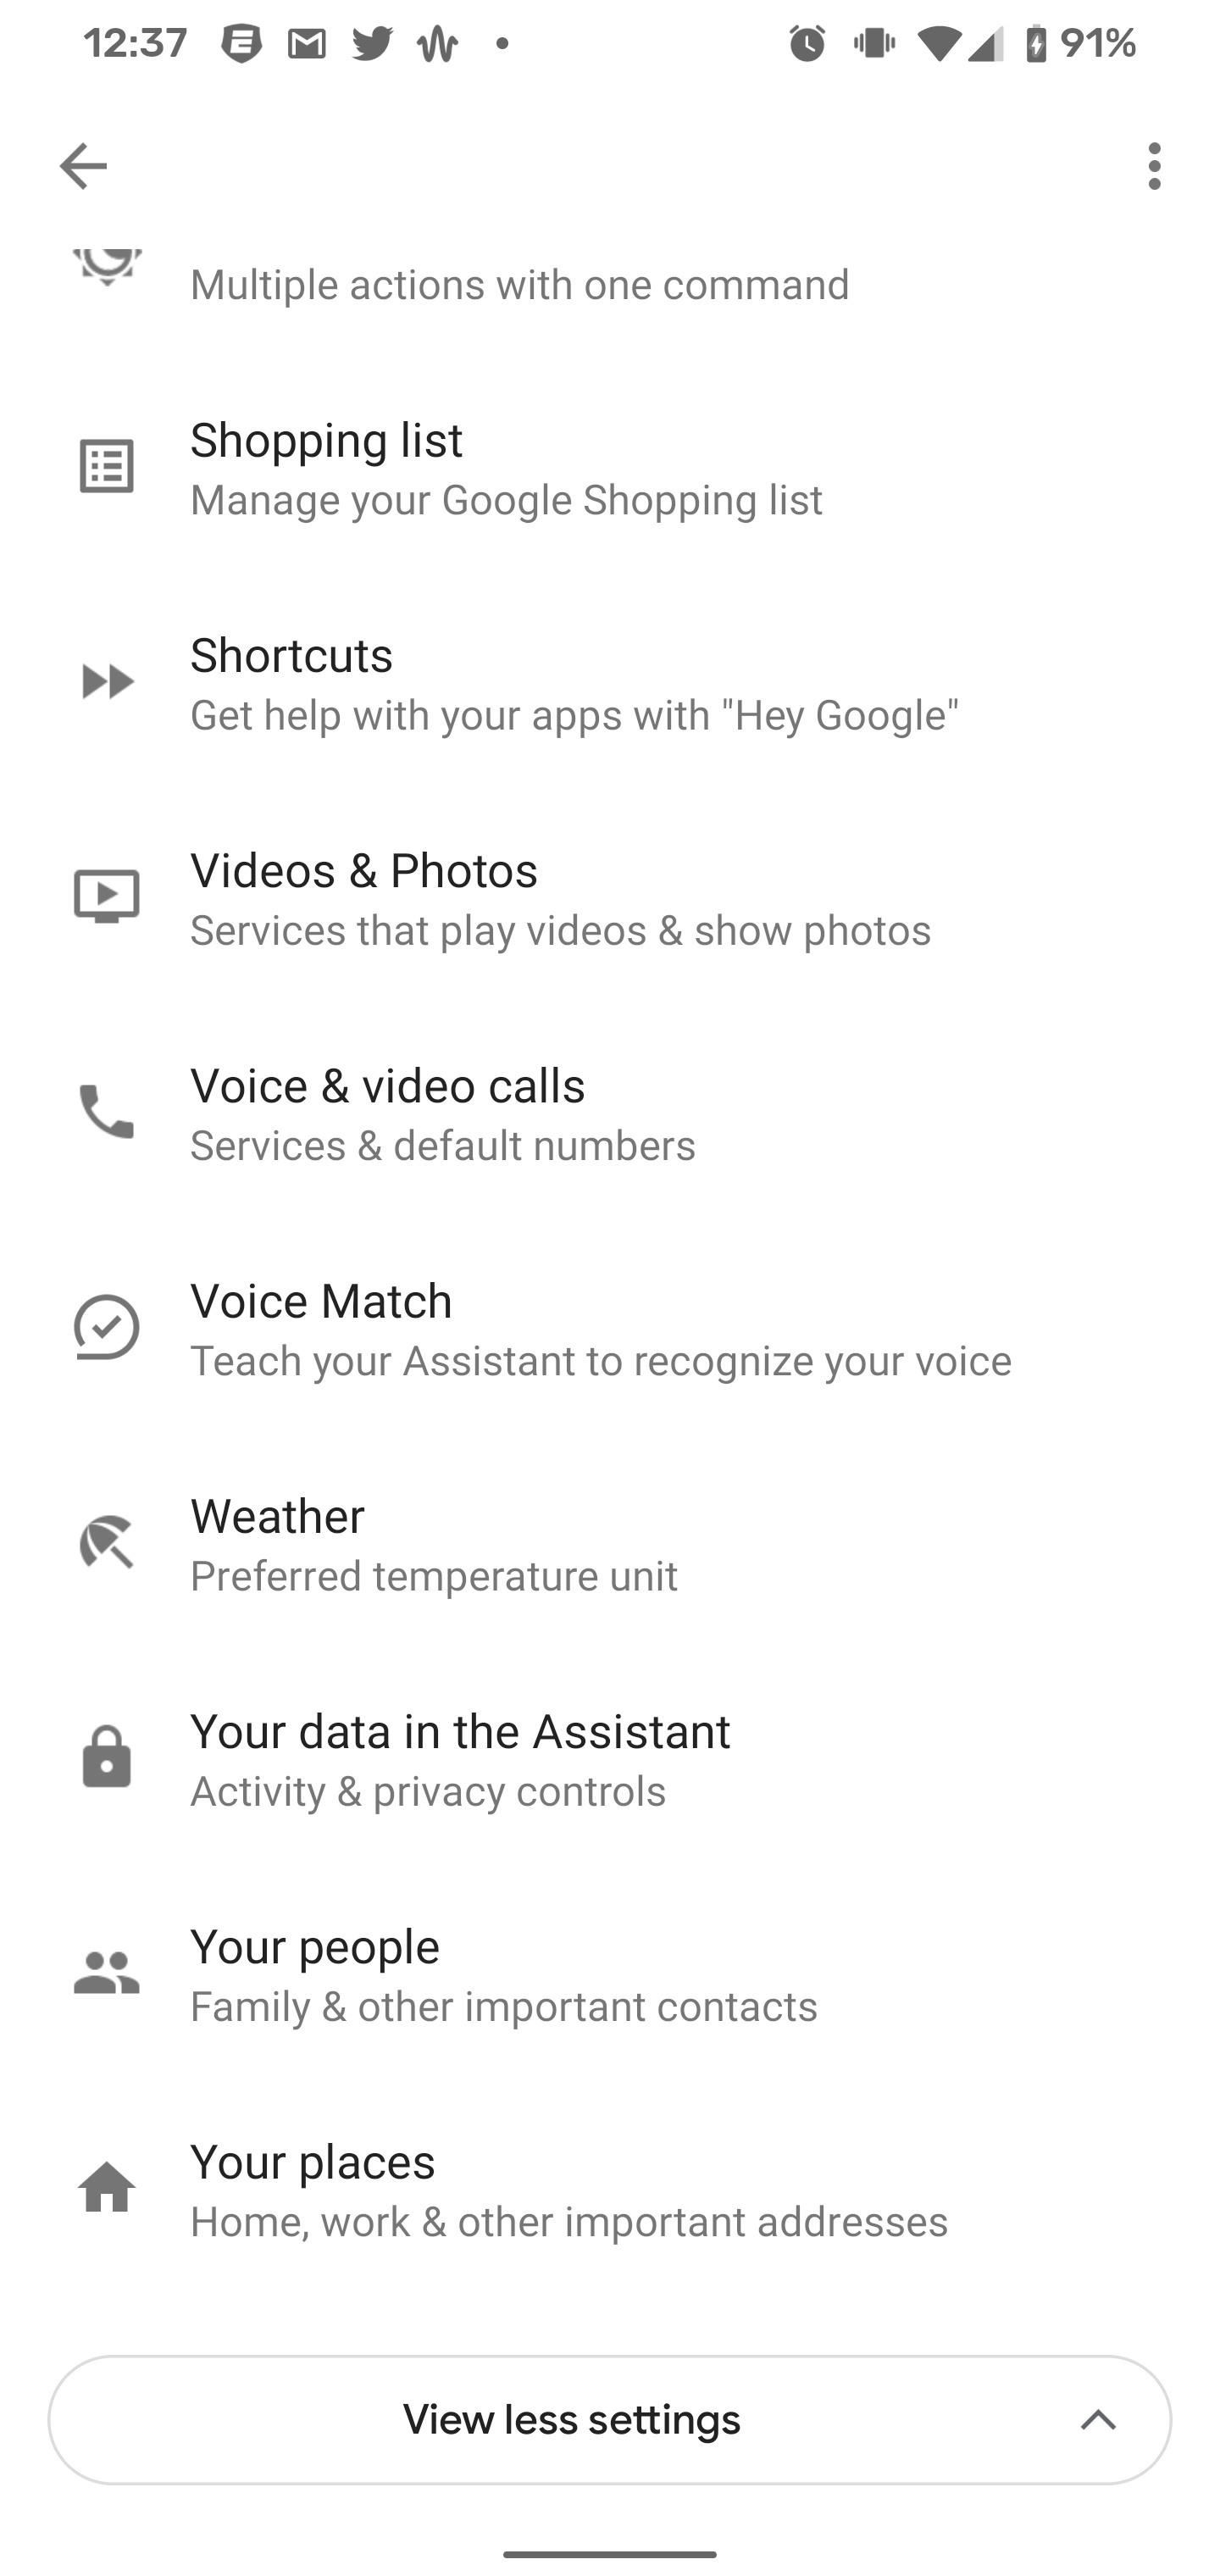 How to Use Google Assistant to Quickly Post to Twitter, Facebook, Instagram, Snapchat & TikTok